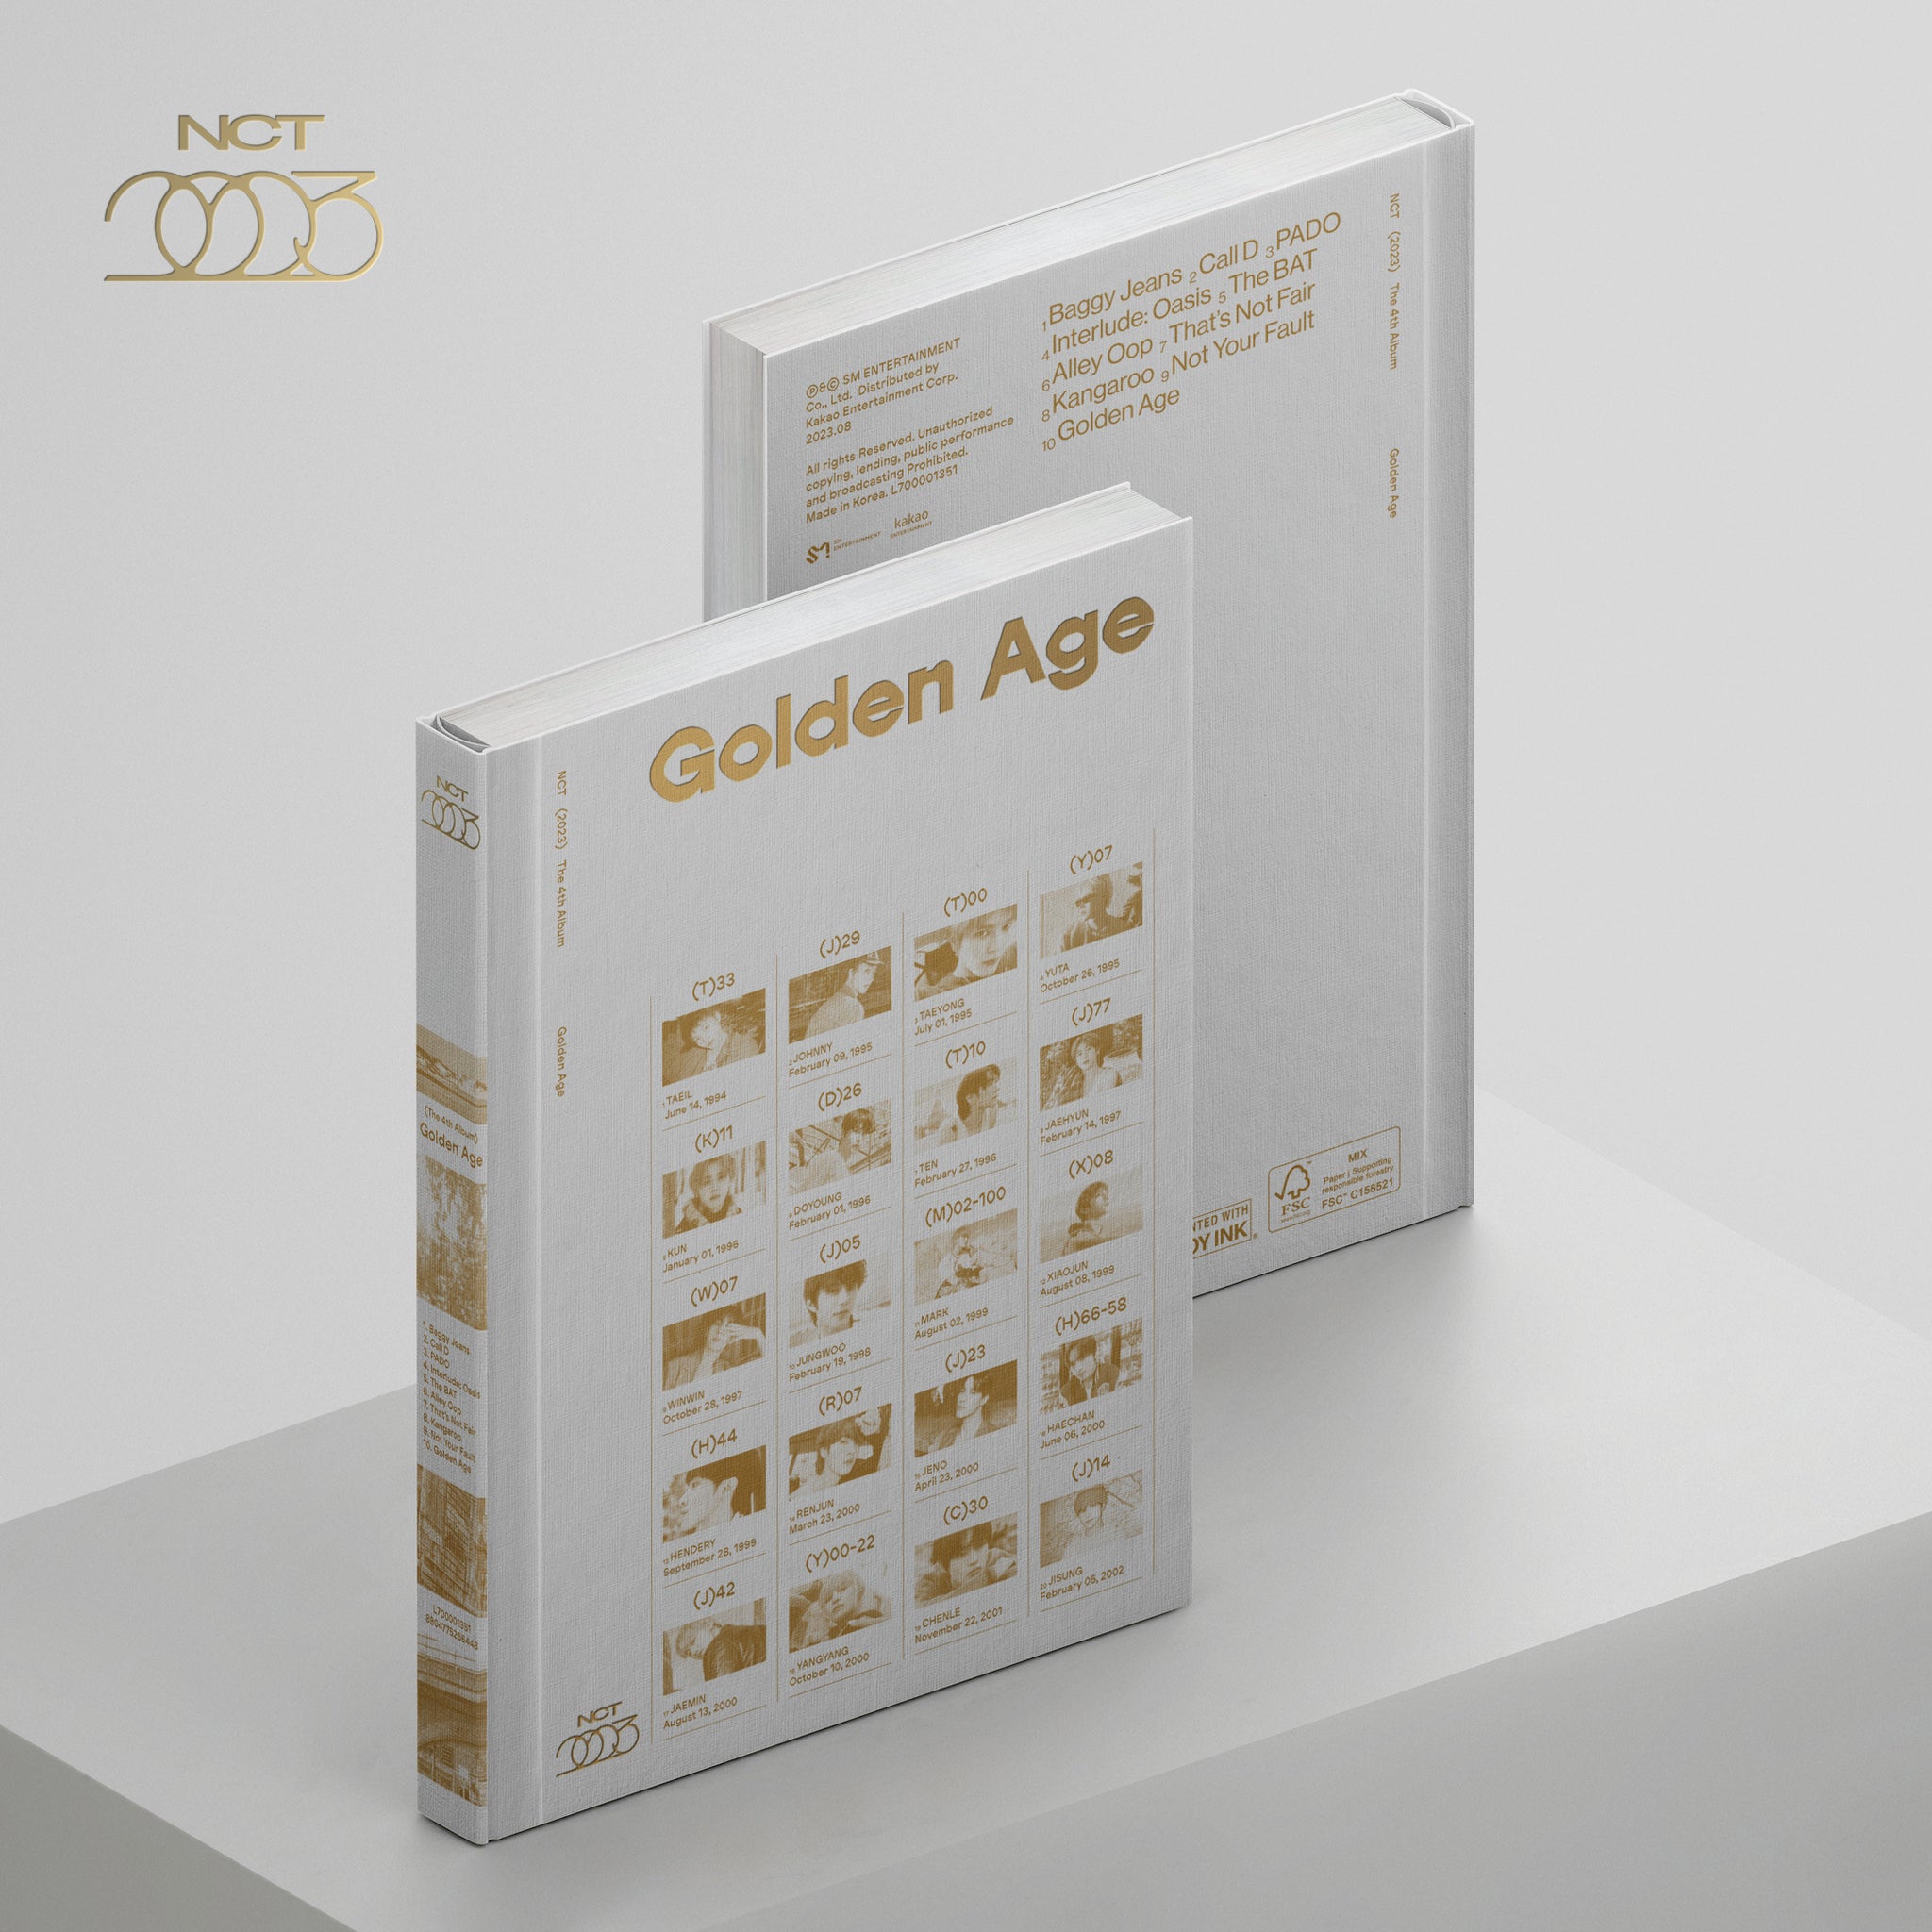 NCT 4TH ALBUM 'GOLDEN AGE' ARCHIVING VERSION COVER